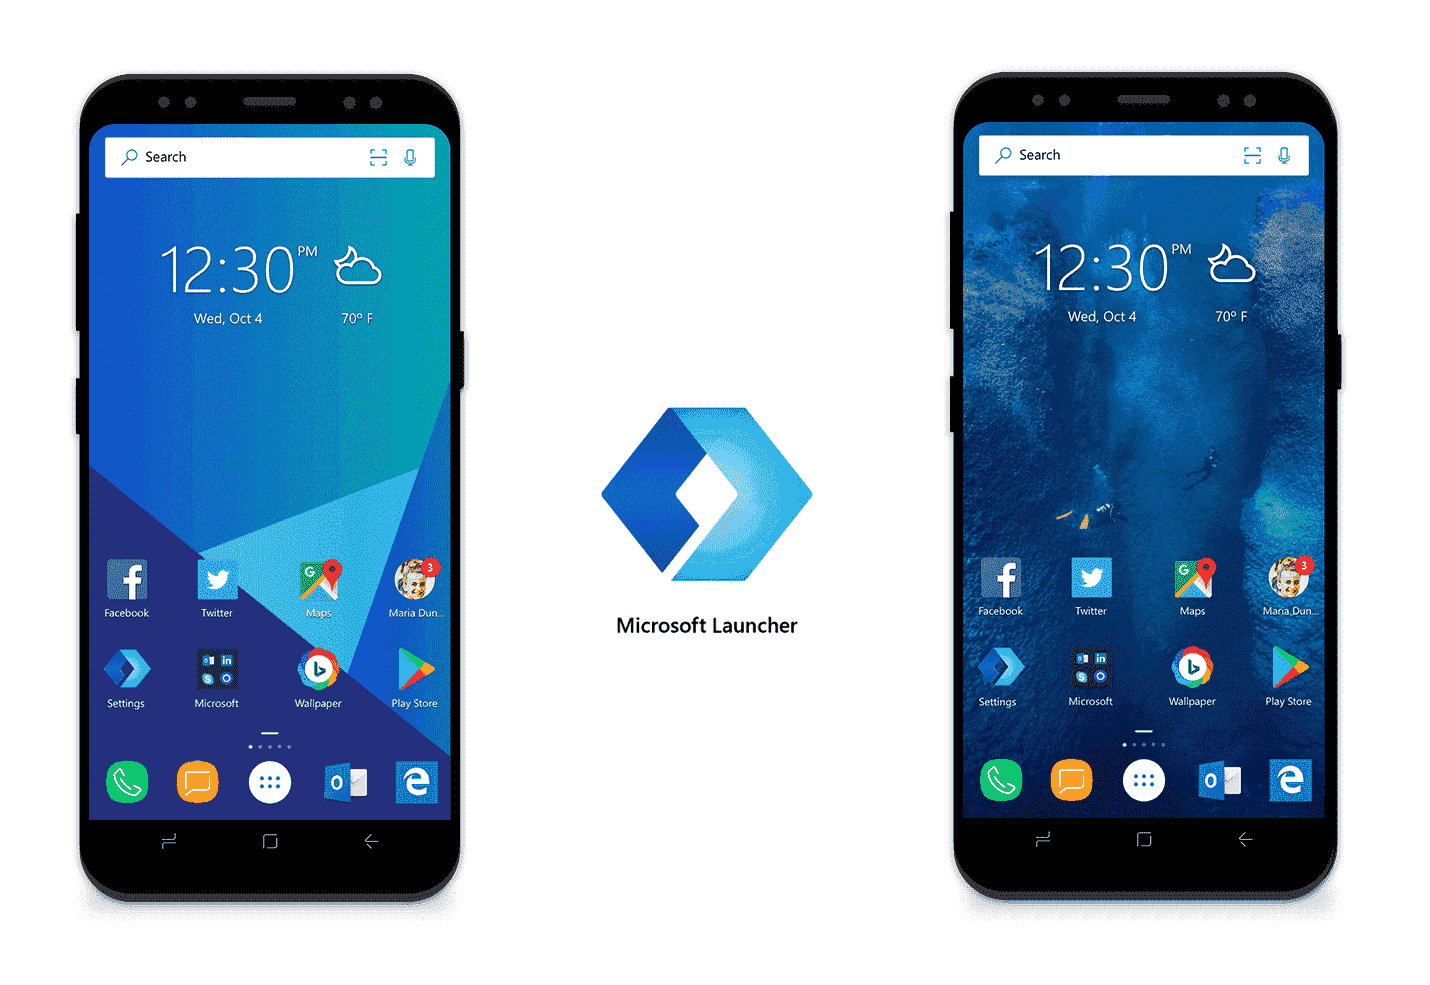 New Microsoft Launcher 4.13.1.45878 version for Android - October 16 f8d914f0746fe7594075d0b98171885f.png